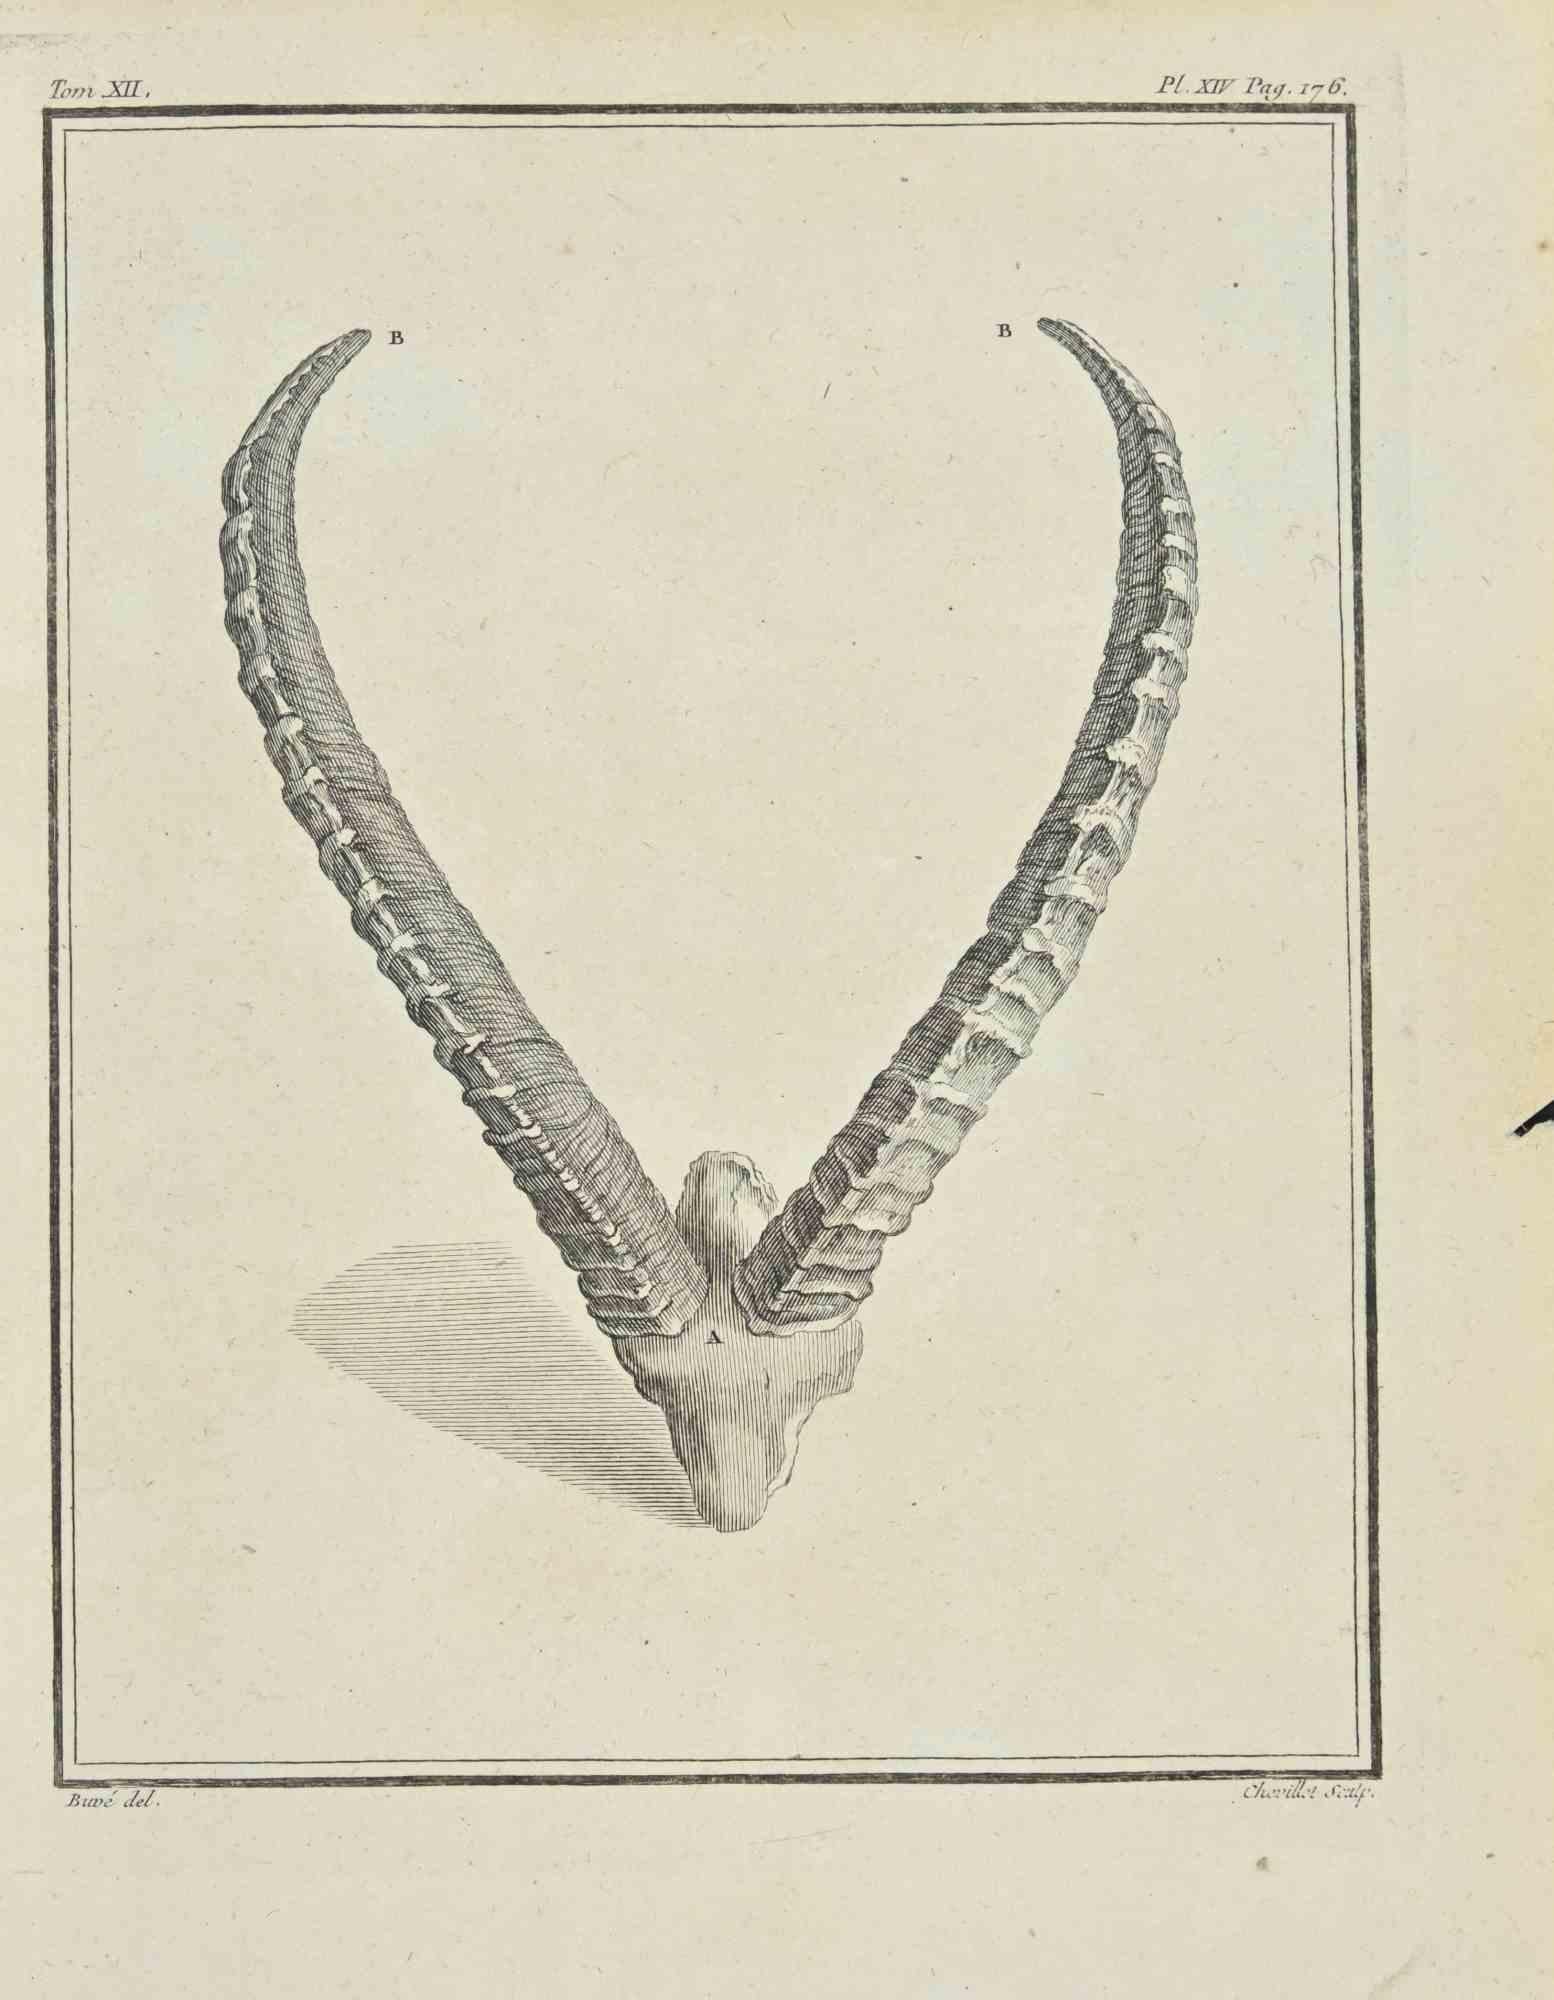 The Horns is an etching realized by Juste Chevillet in 1771.

It belongs to the suite "Histoire Naturelle de Buffon".

The Artist's signature is engraved lower right.

Good conditions.